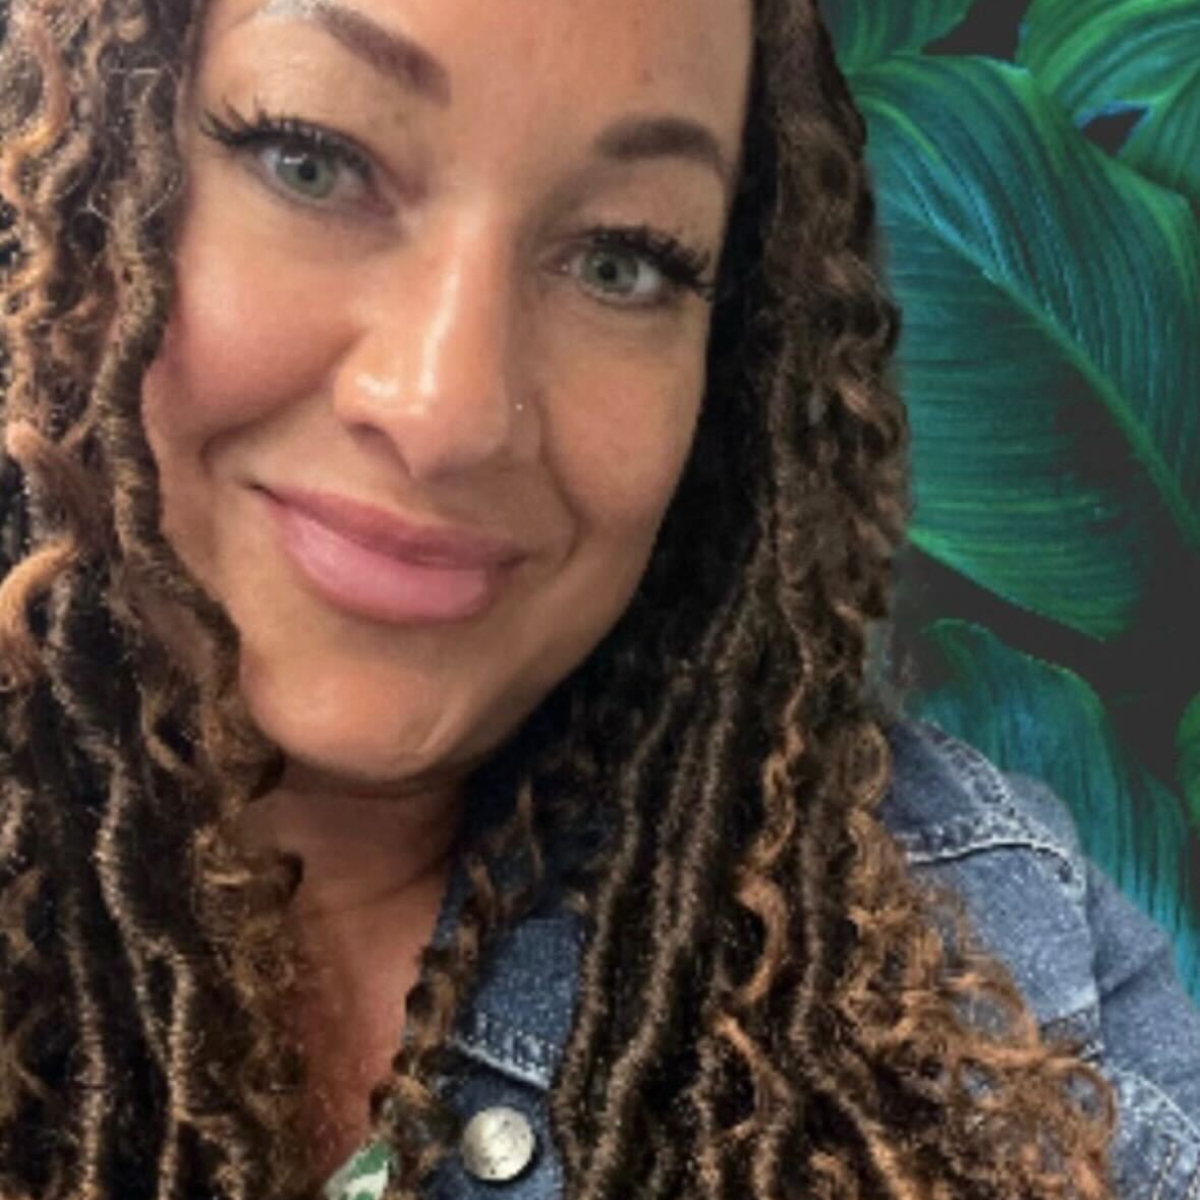 Nkechi Diallo, Formerly Known as Rachel Dolezal, Speaks Out After Losing Job Over OnlyFans Account